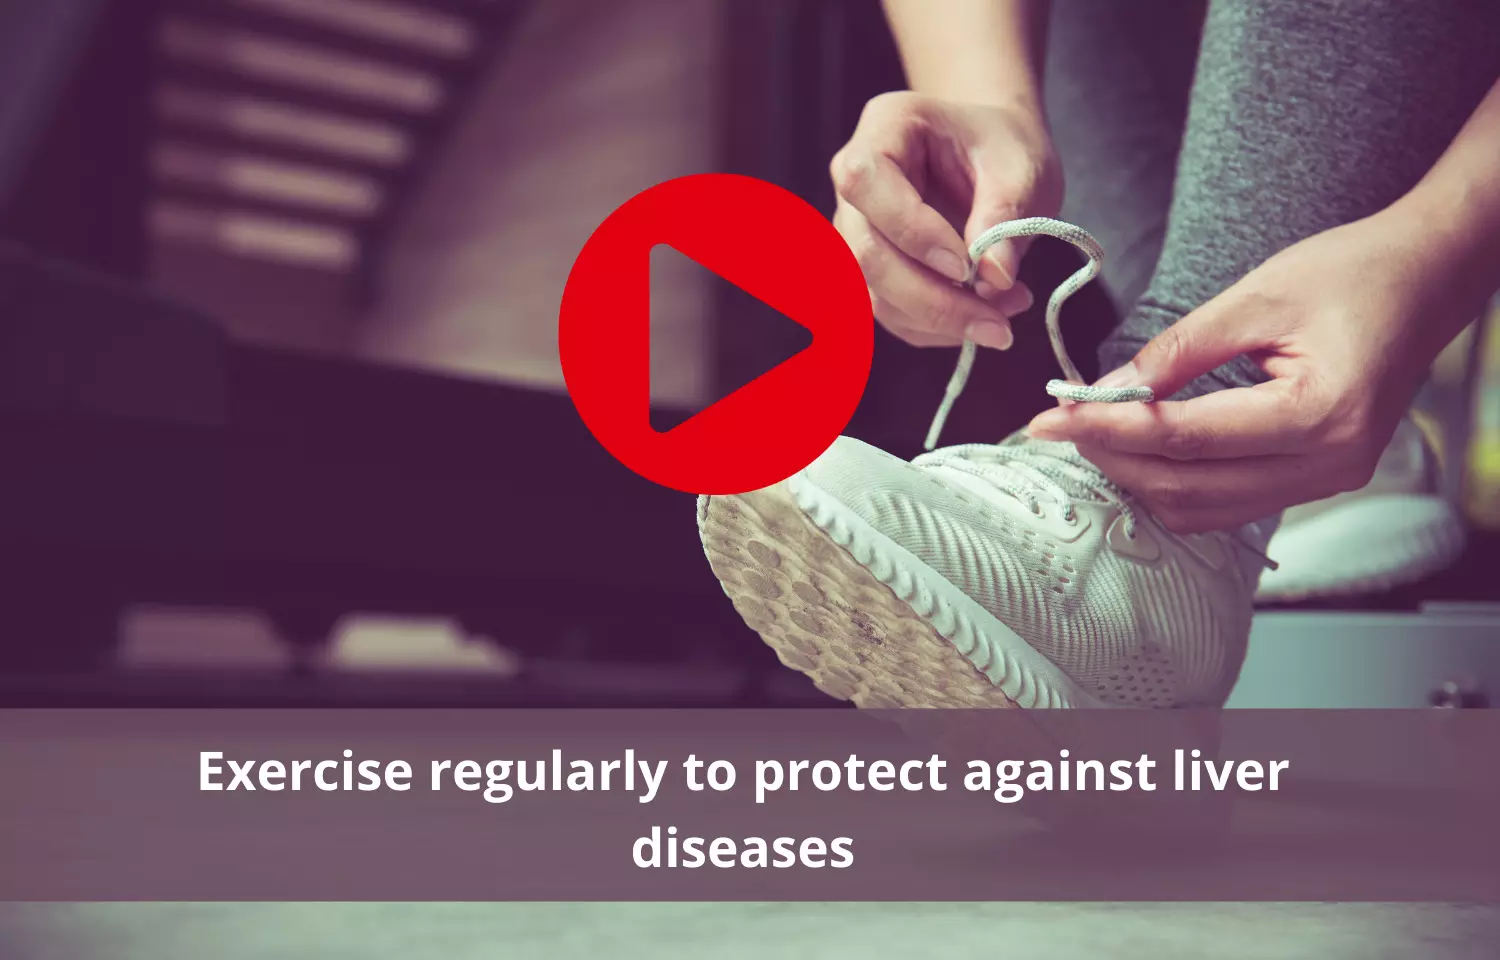 Can exercise protect against fatty liver associated diseases